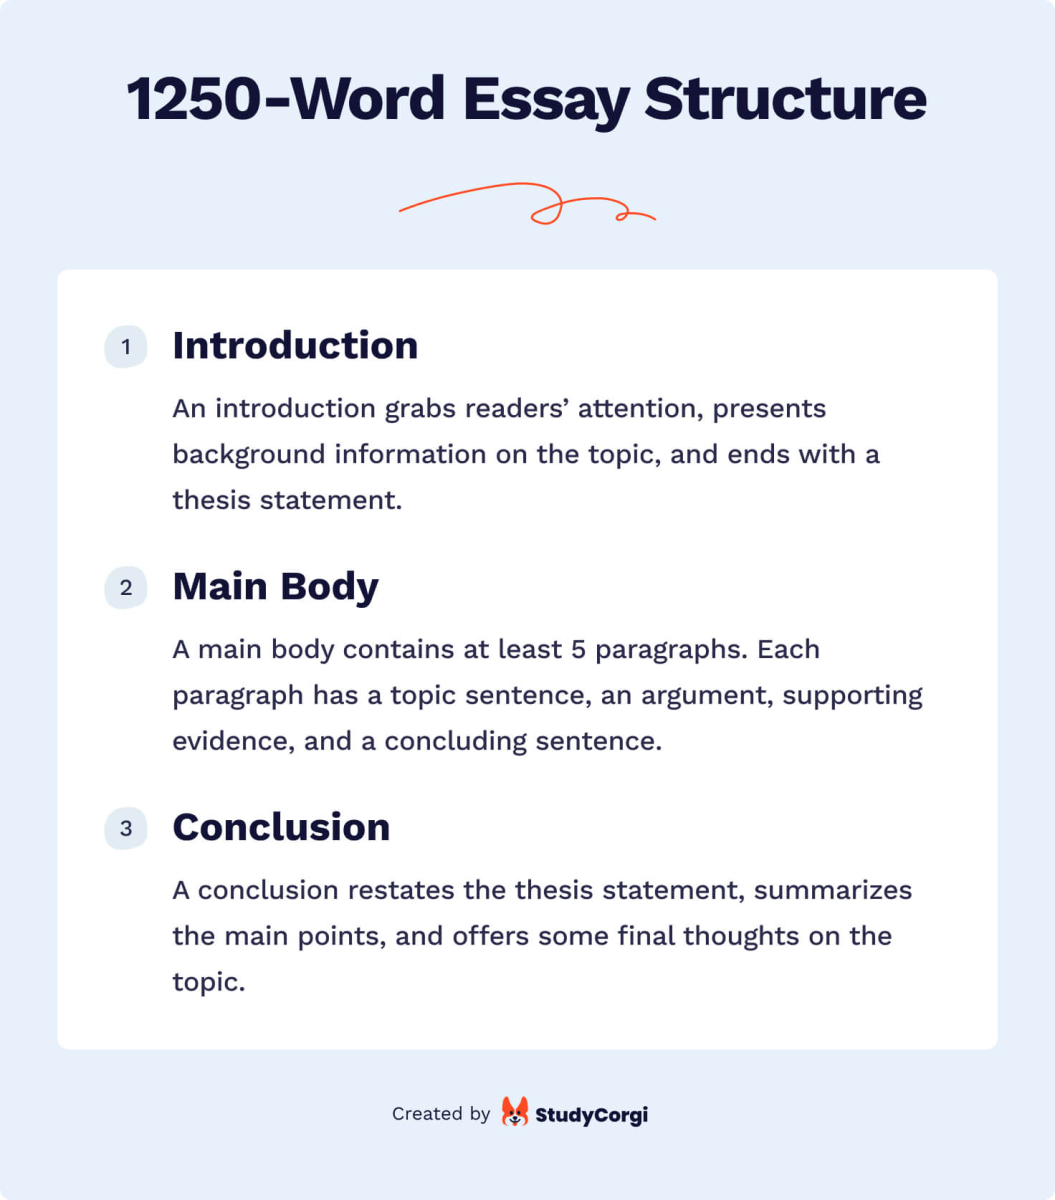 This image shows the 1250-word essay structure.